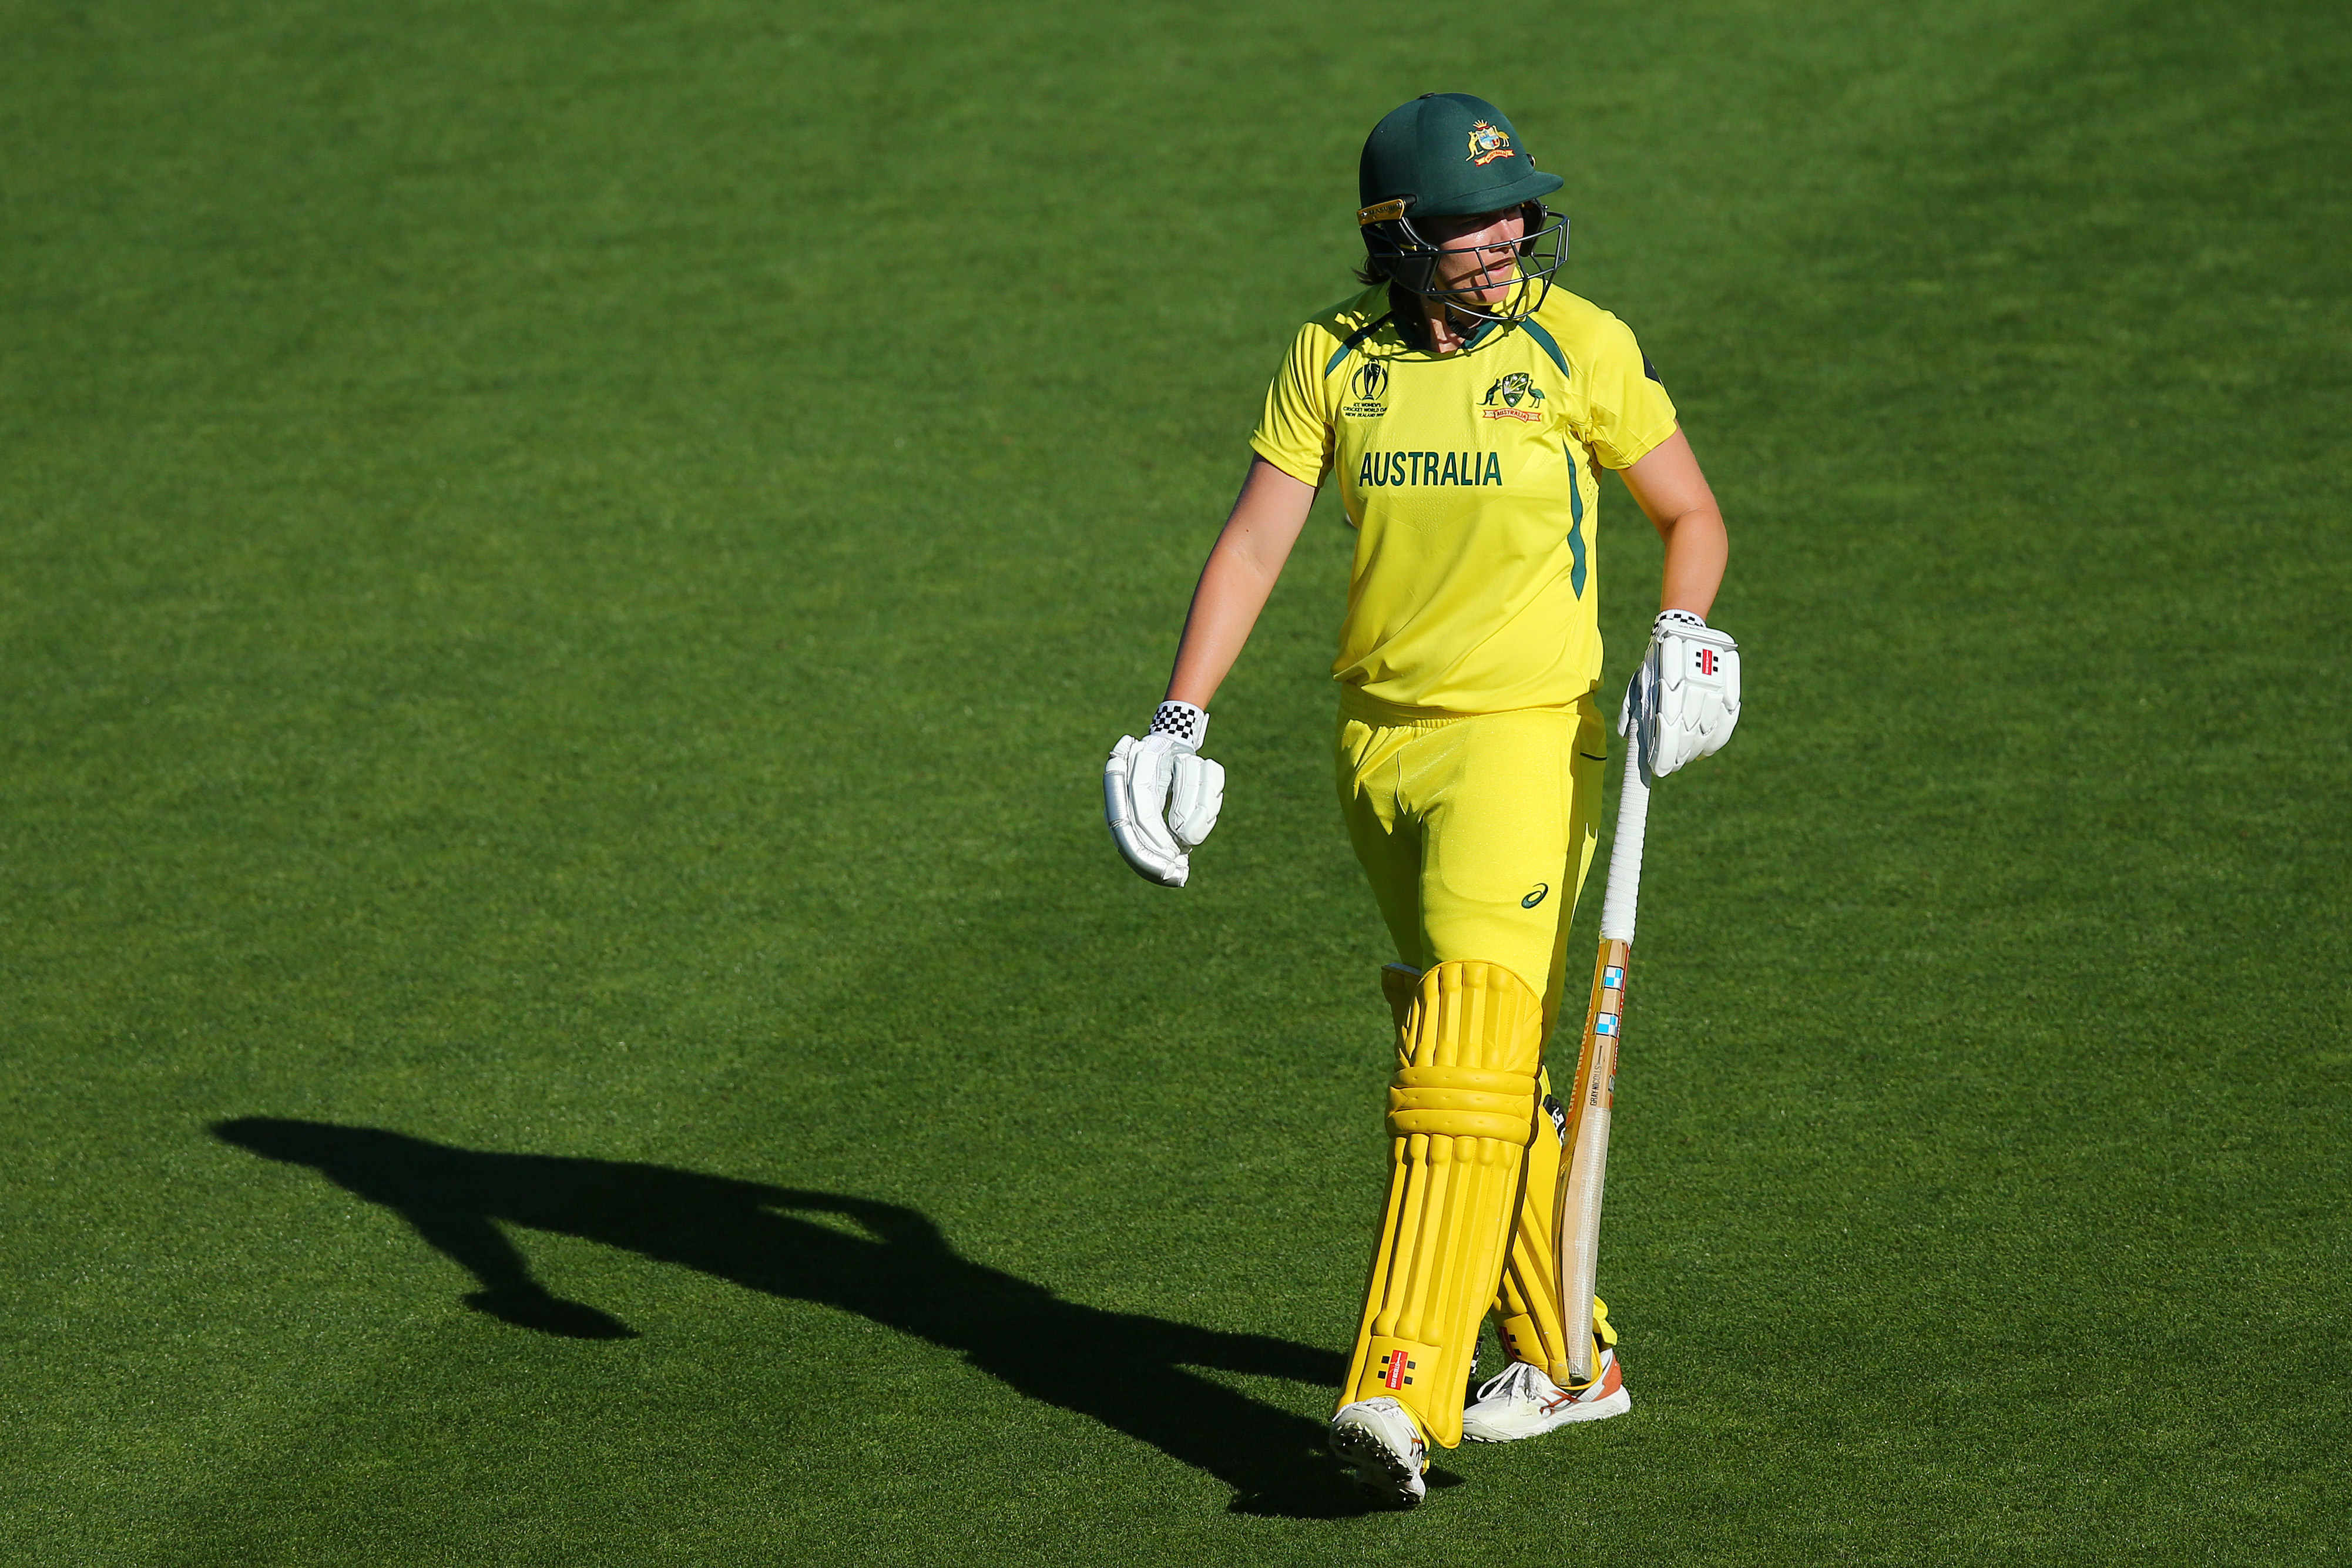 CWG 2022 | Australia cricketer Tahlia McGrath allowed to play final despite being Covid-19 positive